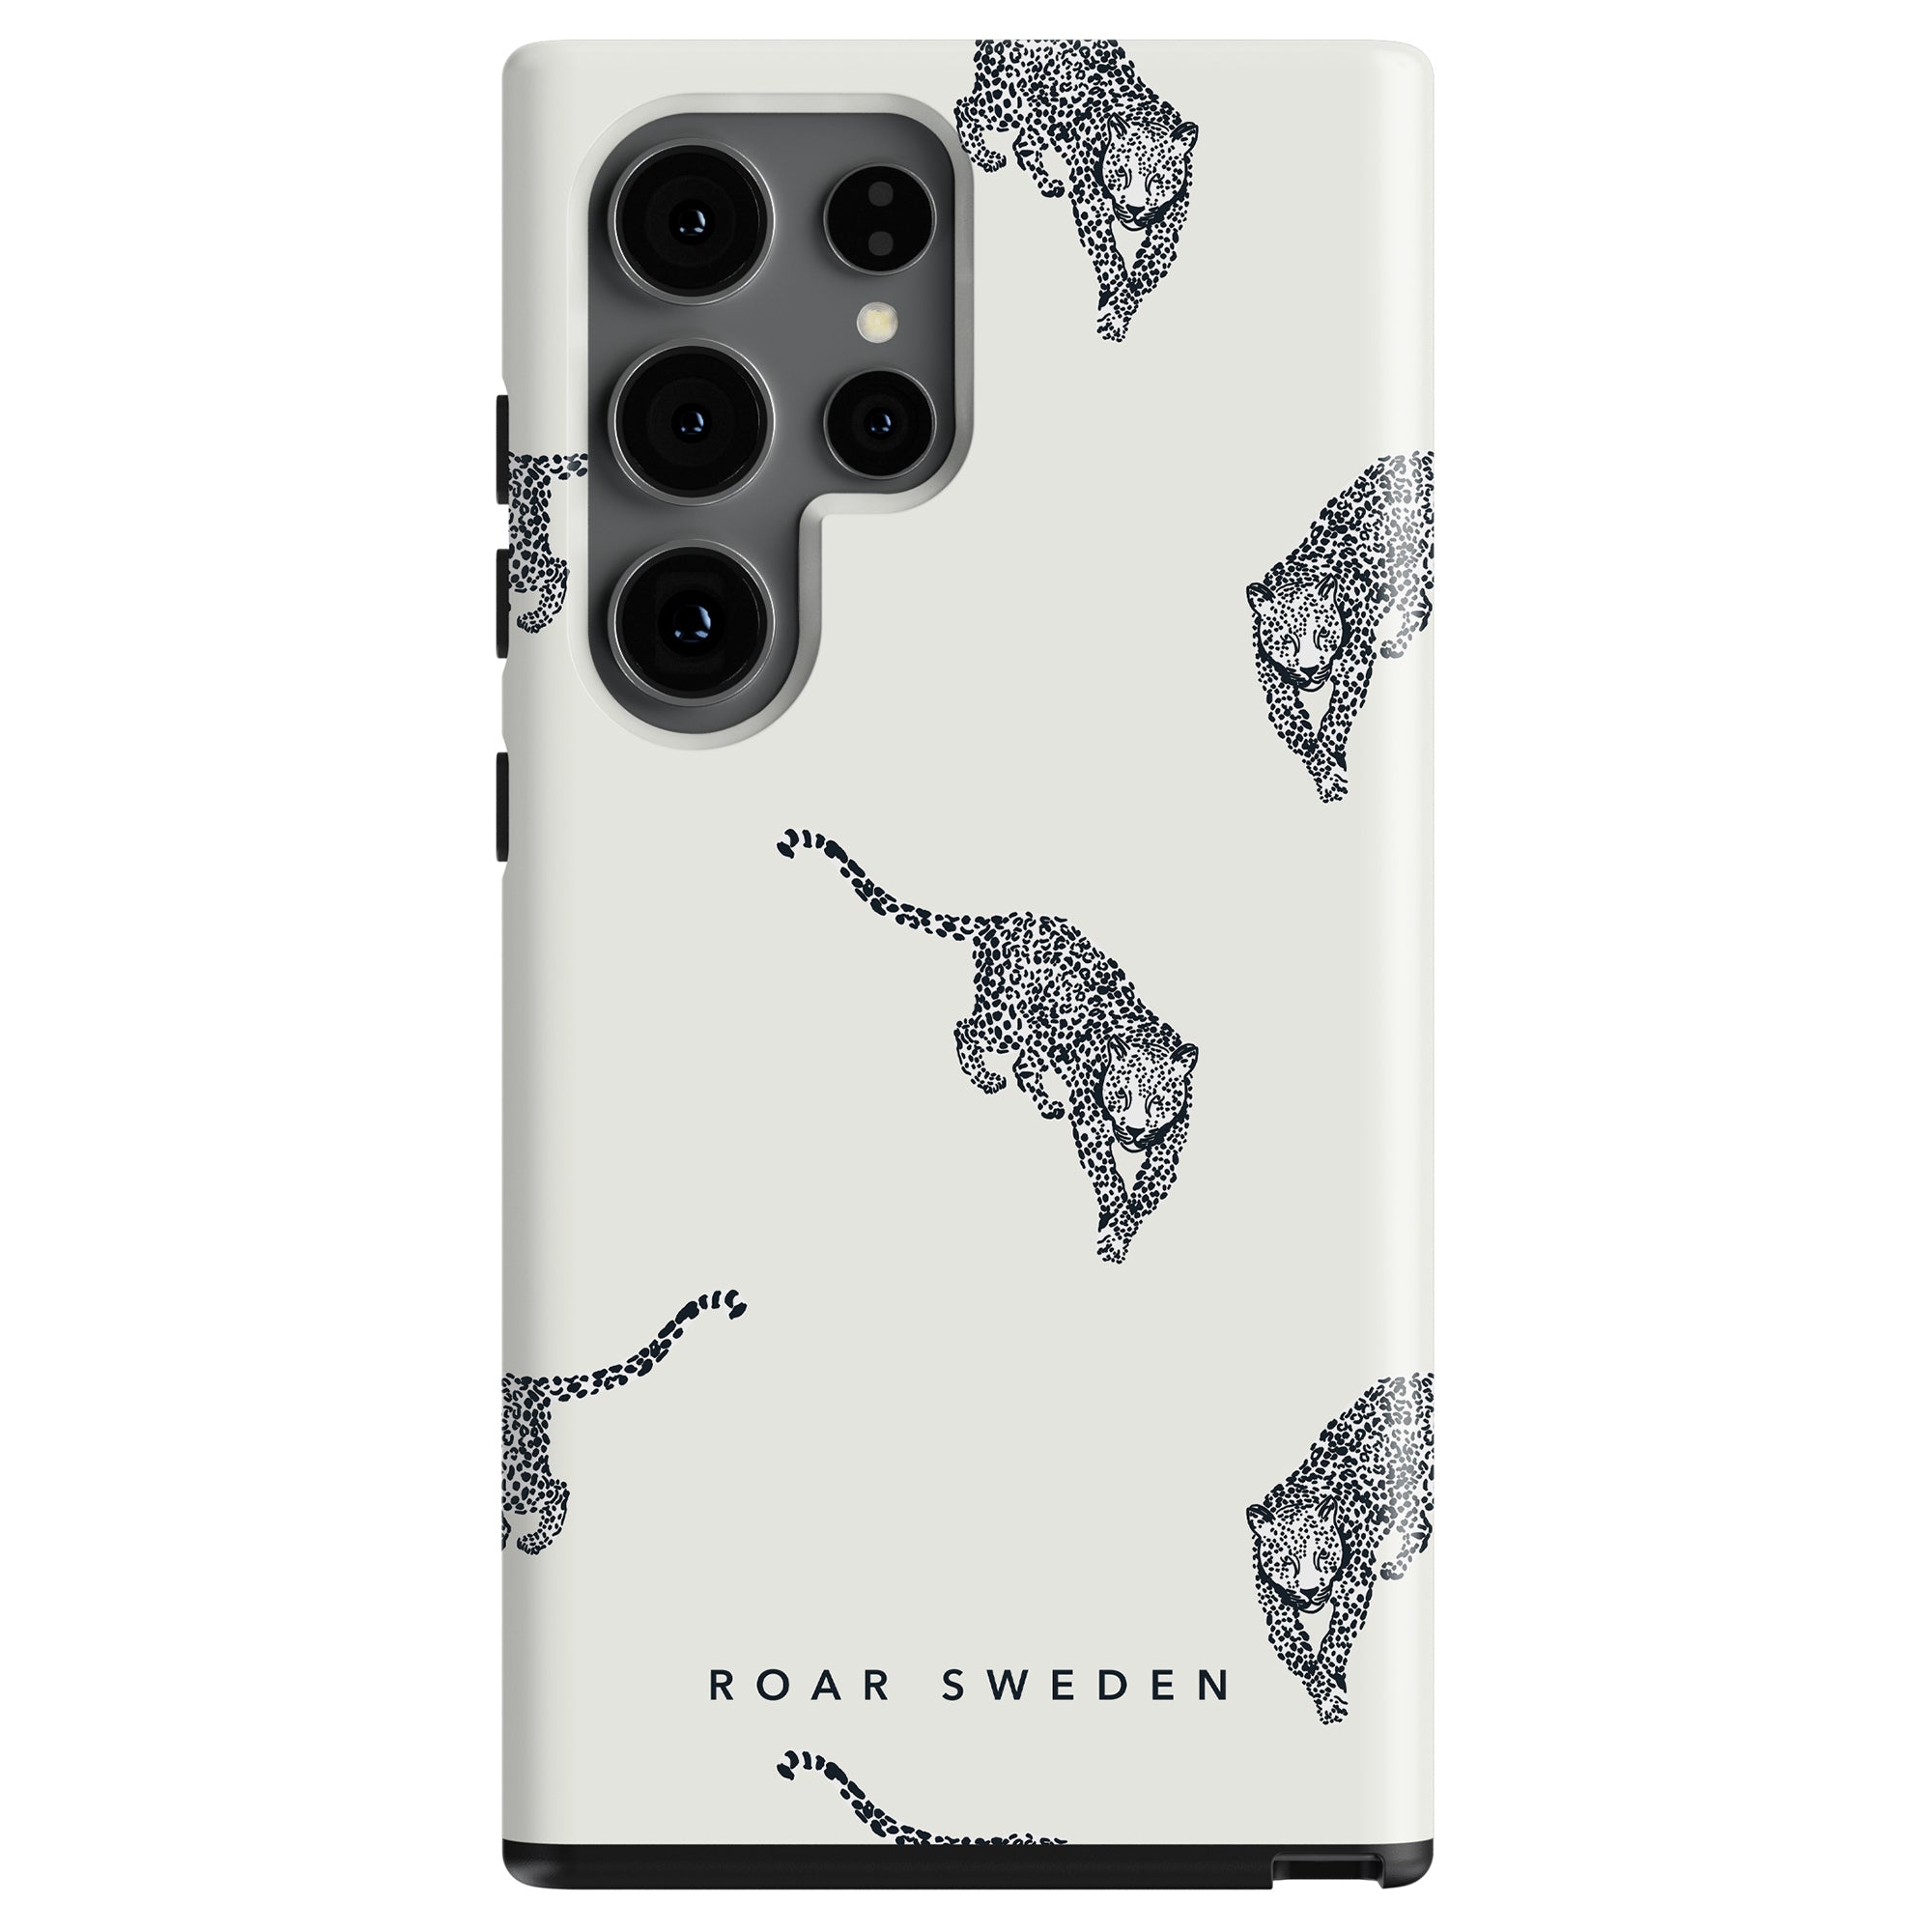 A Kitty Deluxe - Tough Case smartphone with a white case featuring a pattern of leopard prints and the text "Roar Sweden" on it.